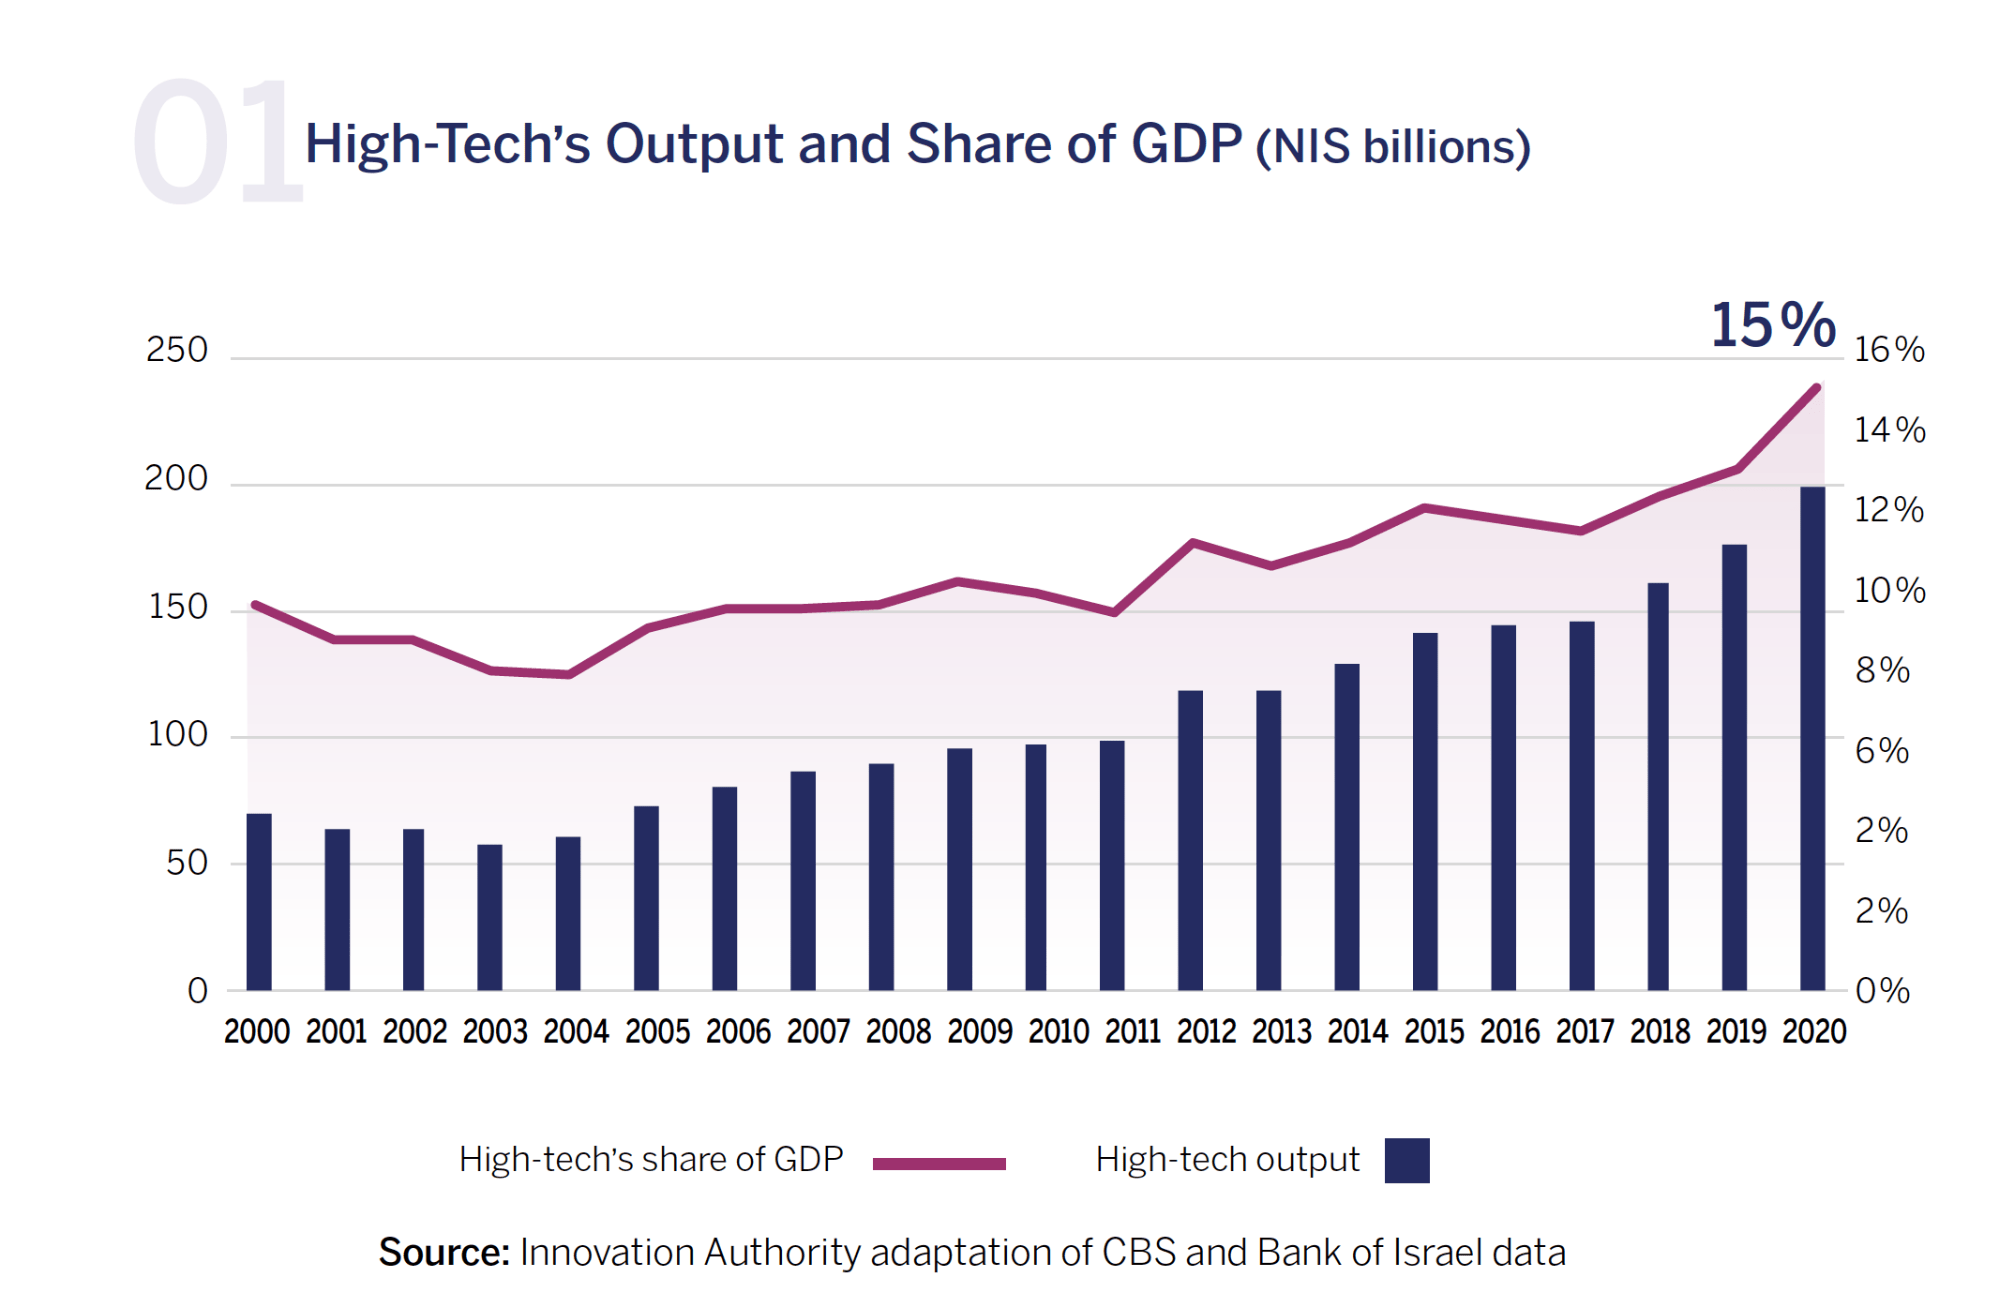 High-tech Output and Share of GDP in Israel